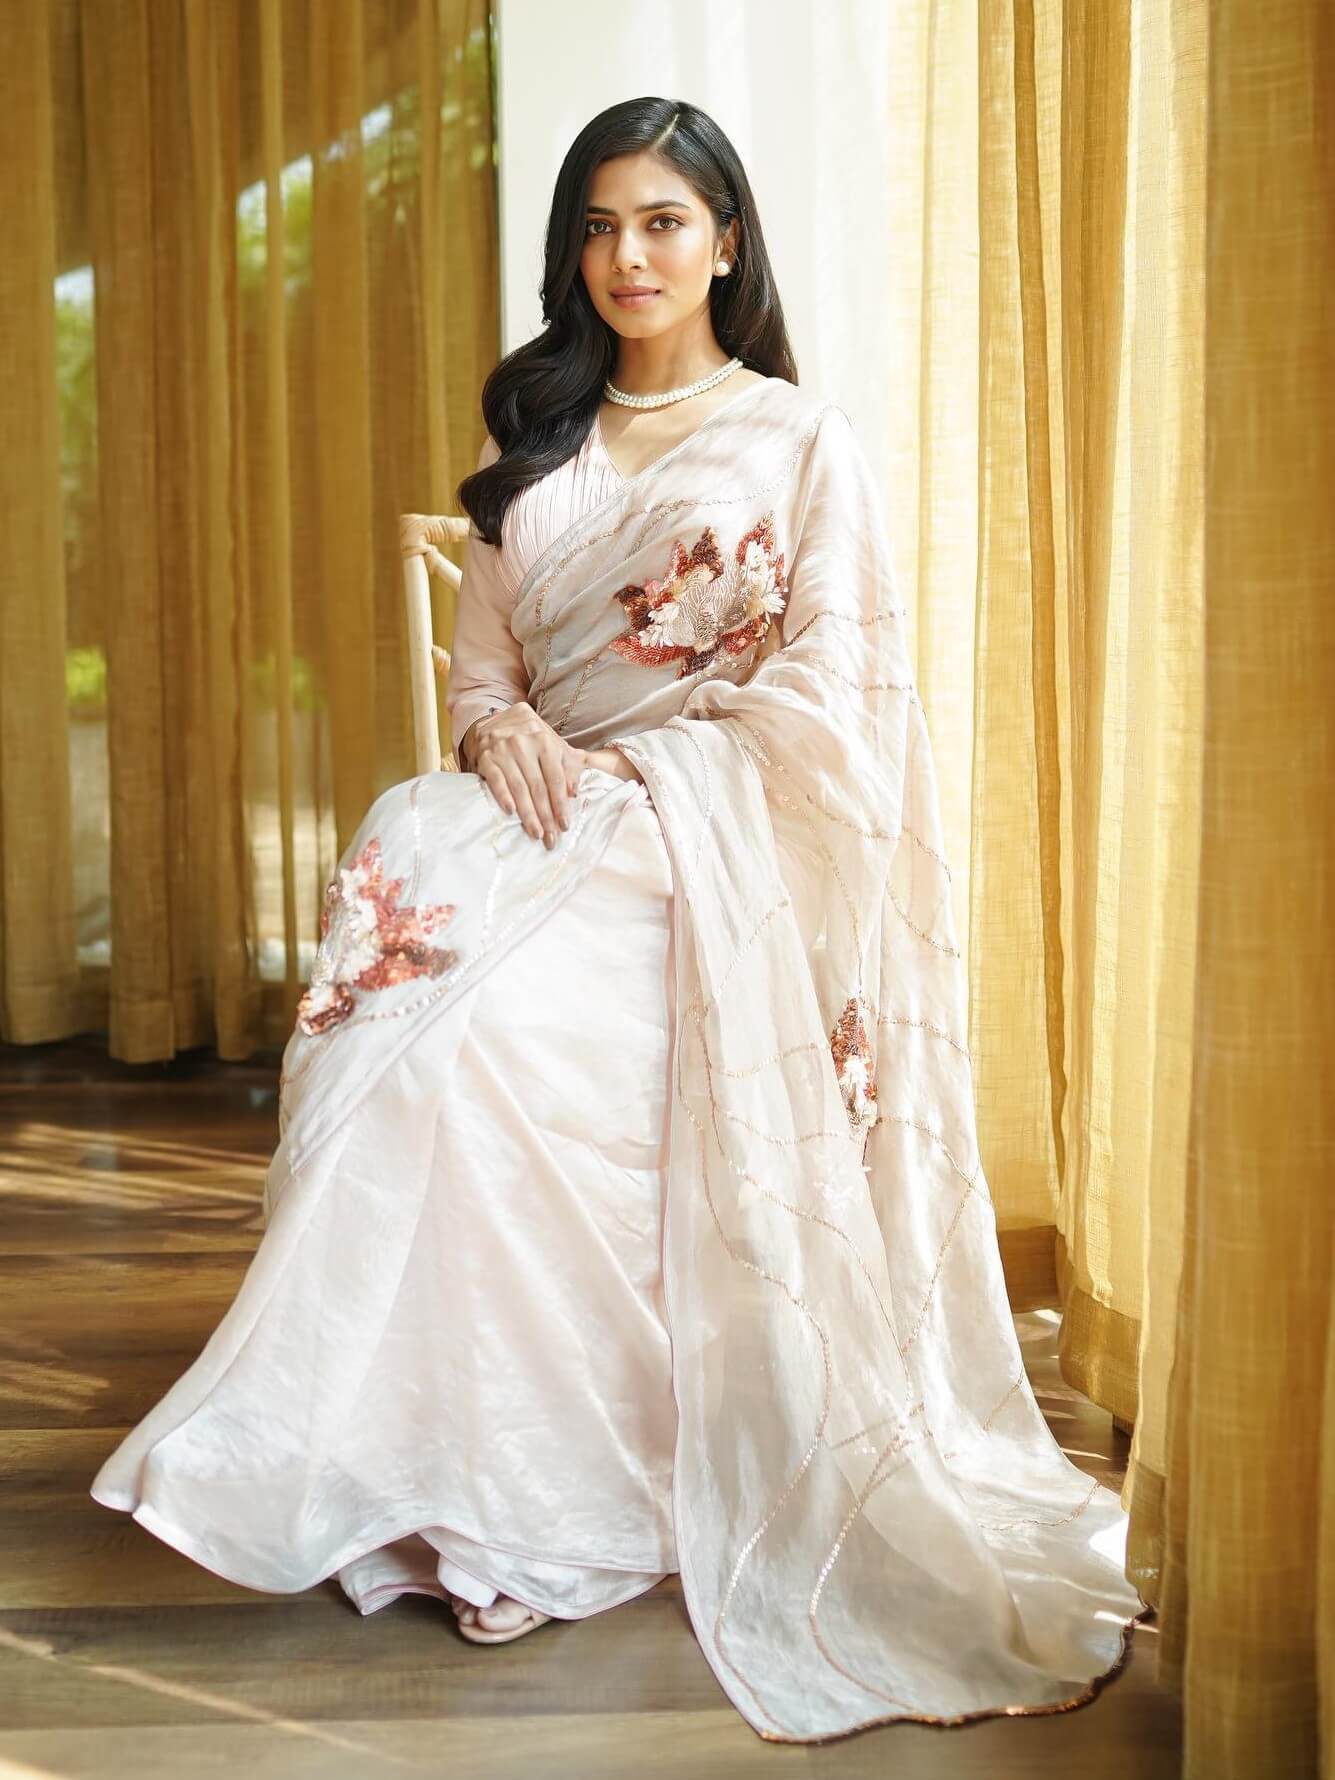 Malavika Mohanan In Satin Silk Floral Sequined Saree With Ruched Blouse - Traditional & Tempting Outfits & Looks